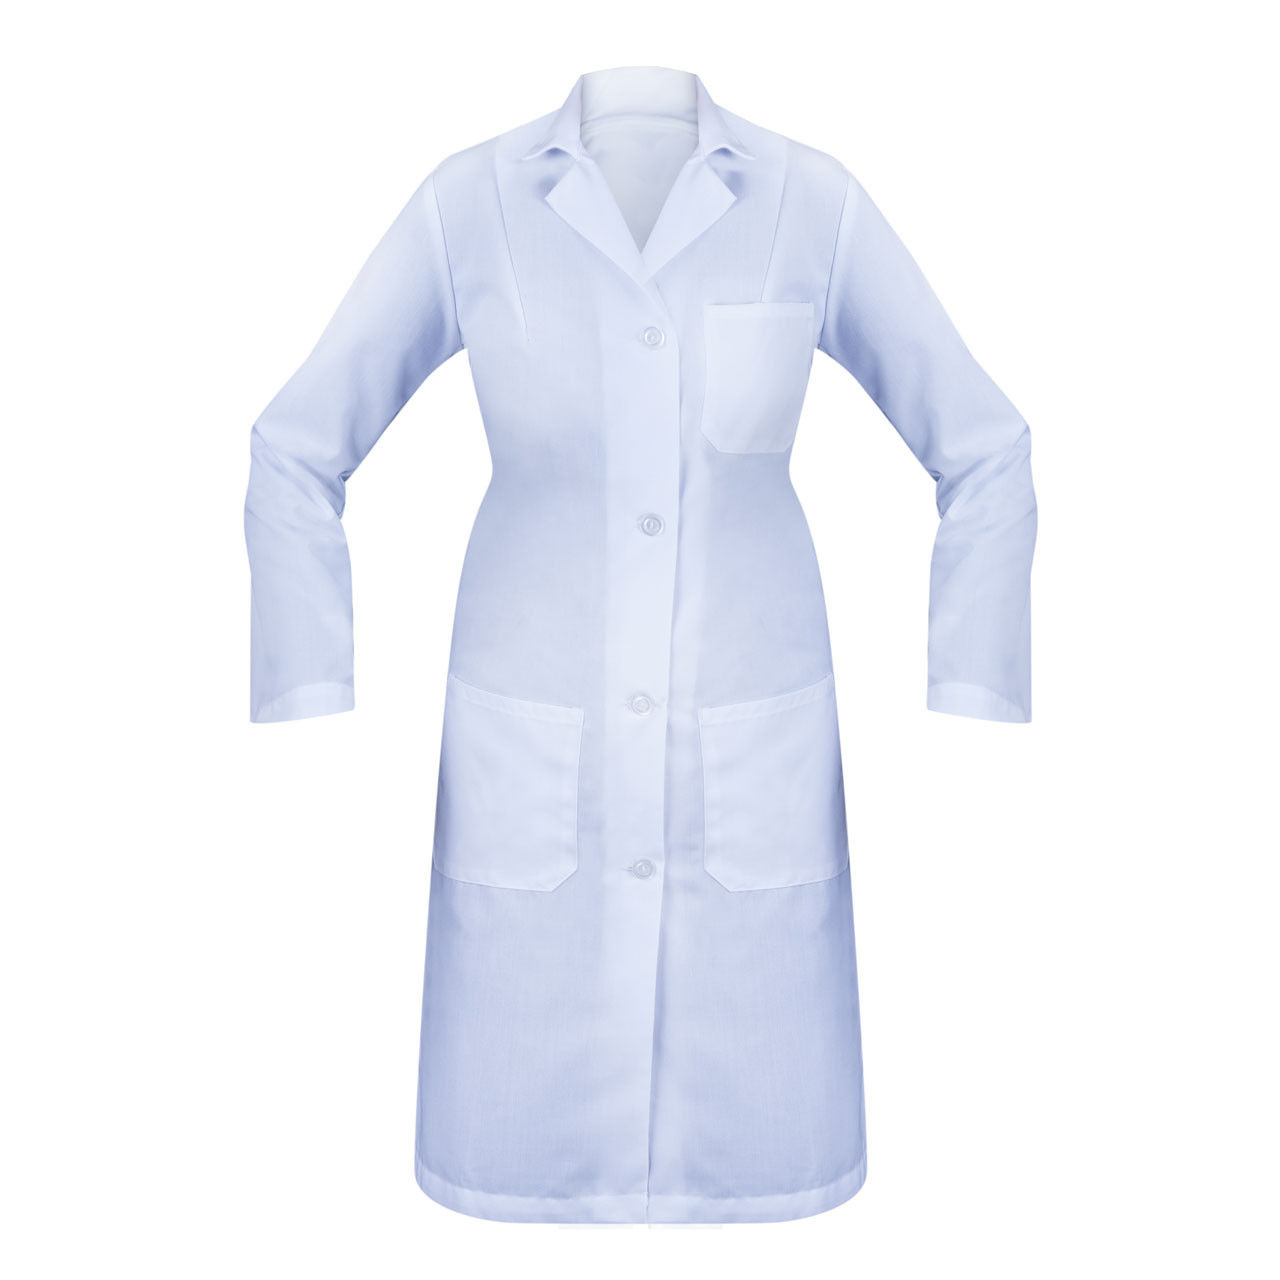 How many pockets does the Female Lab Coat have?